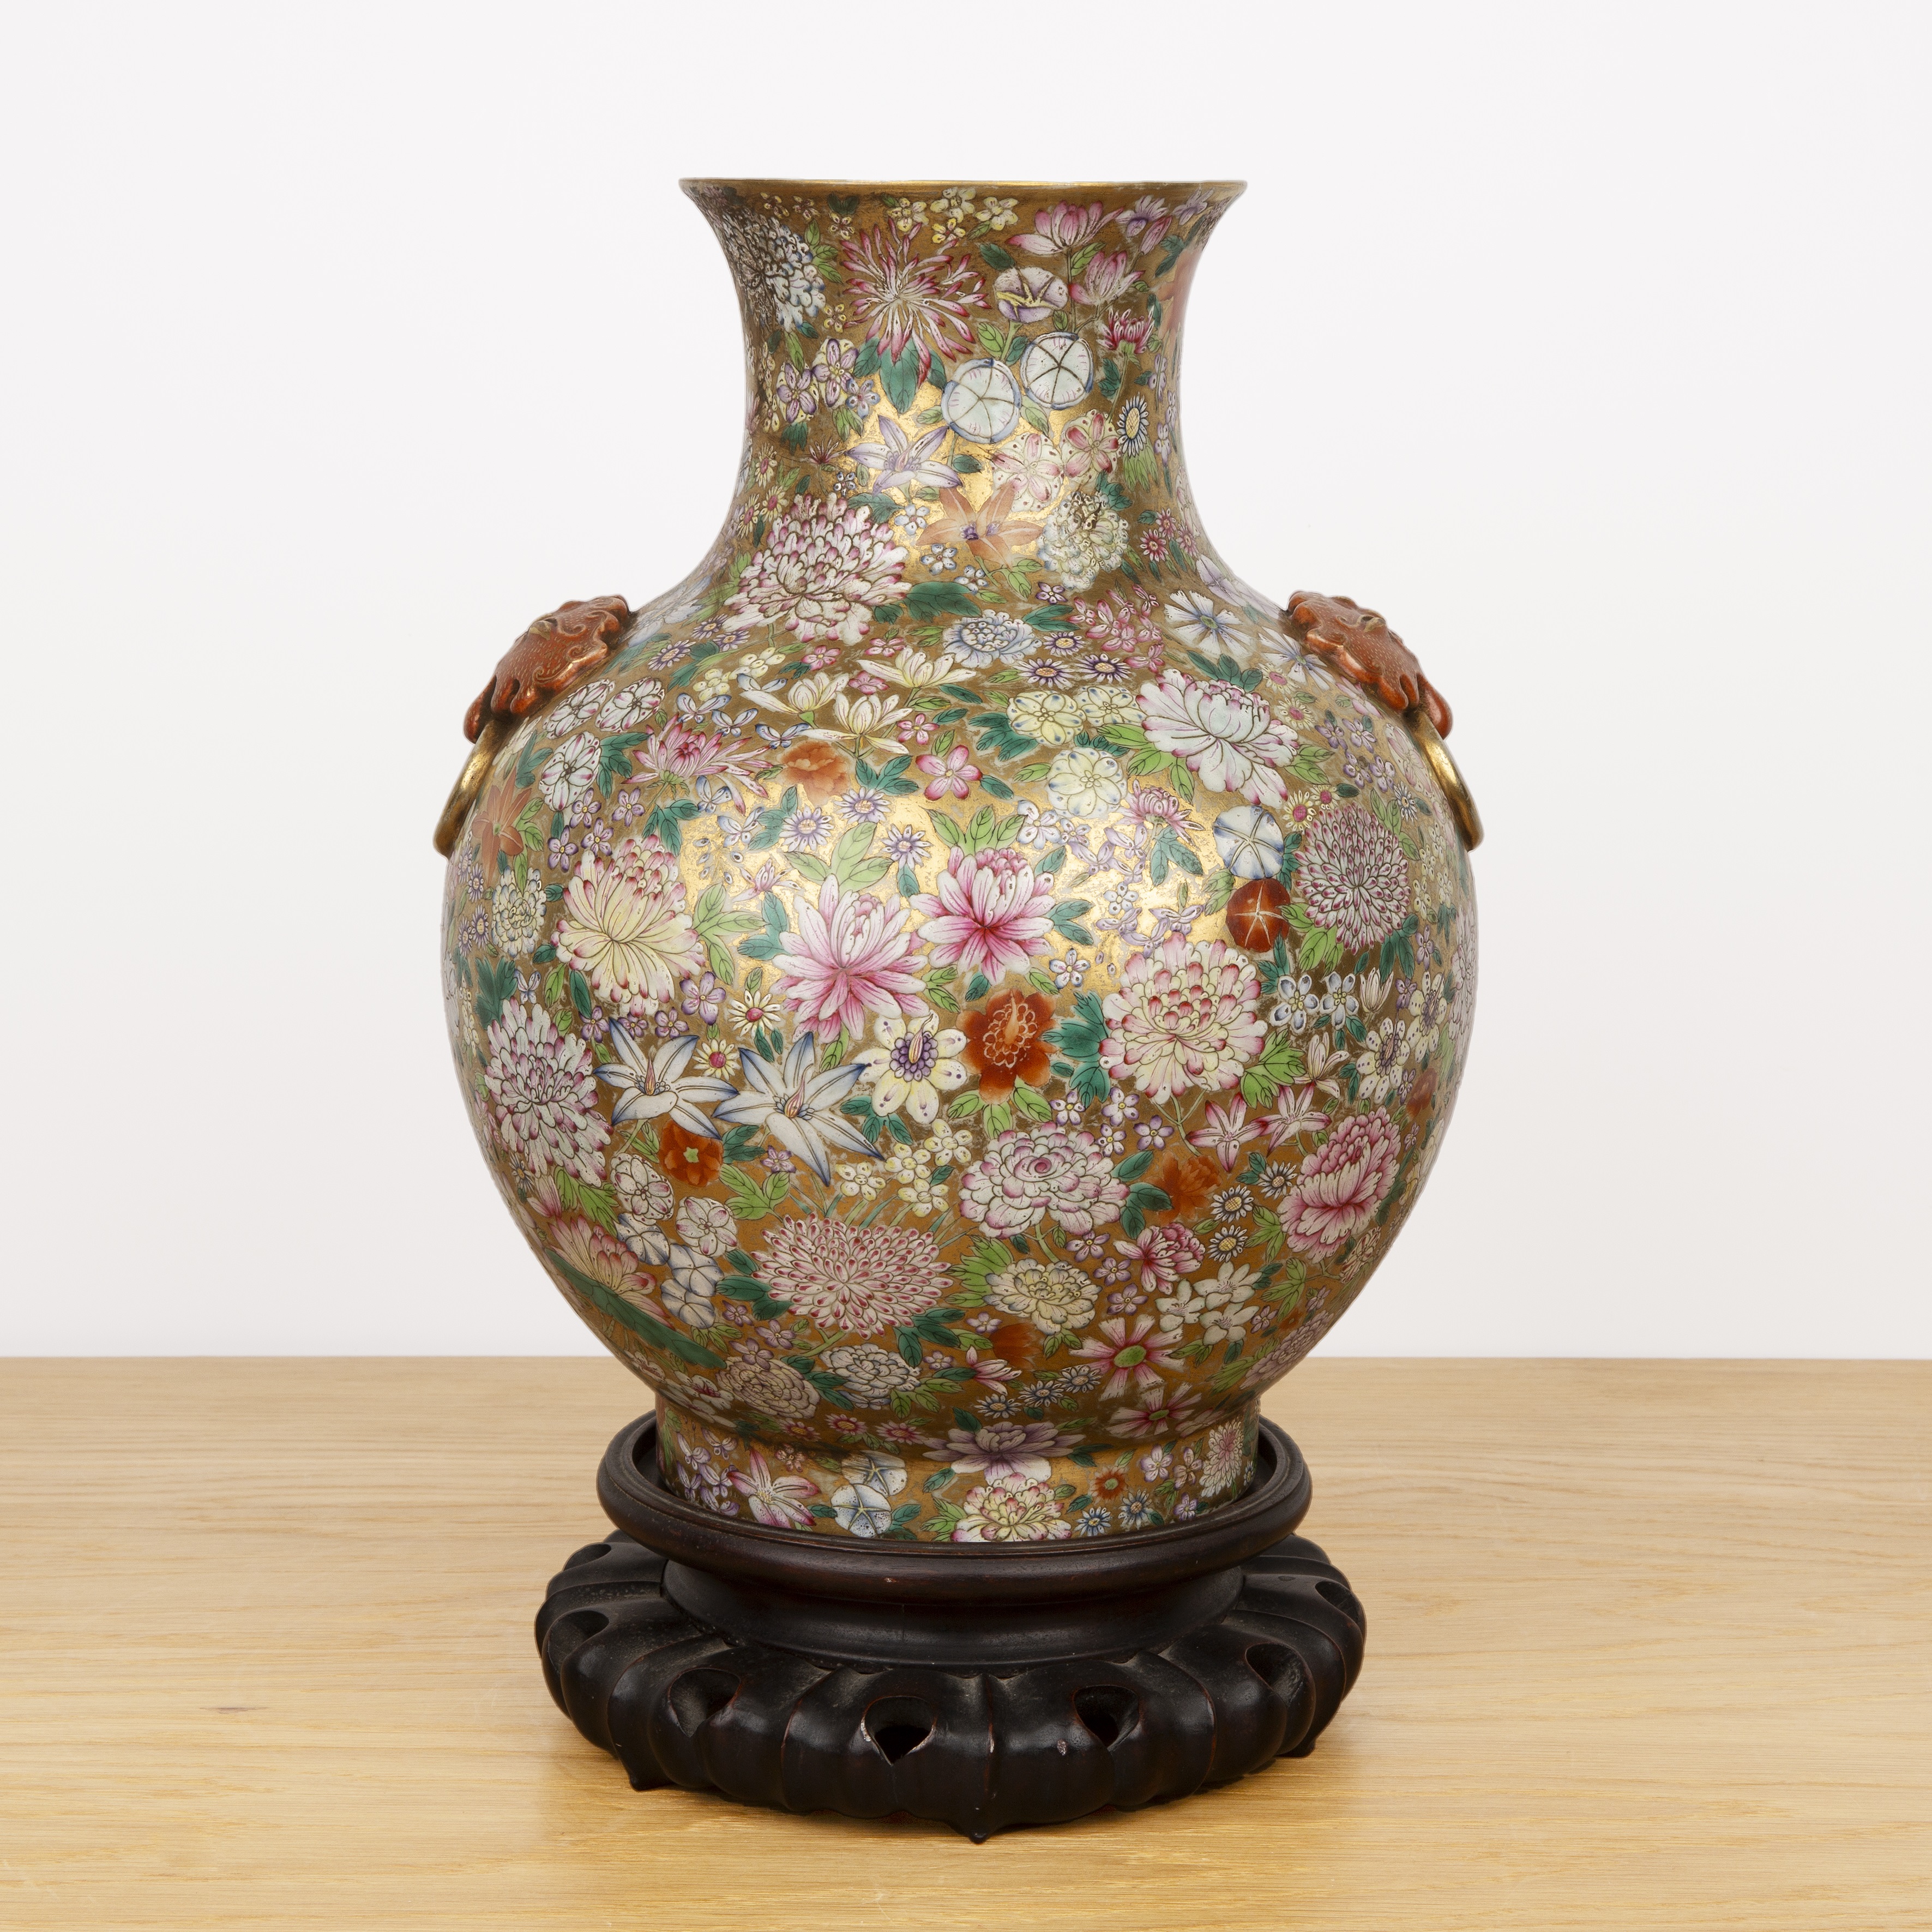 Millefleur porcelain vase and stand Chinese, circa 1900 with raised ruyi and ring handles. The